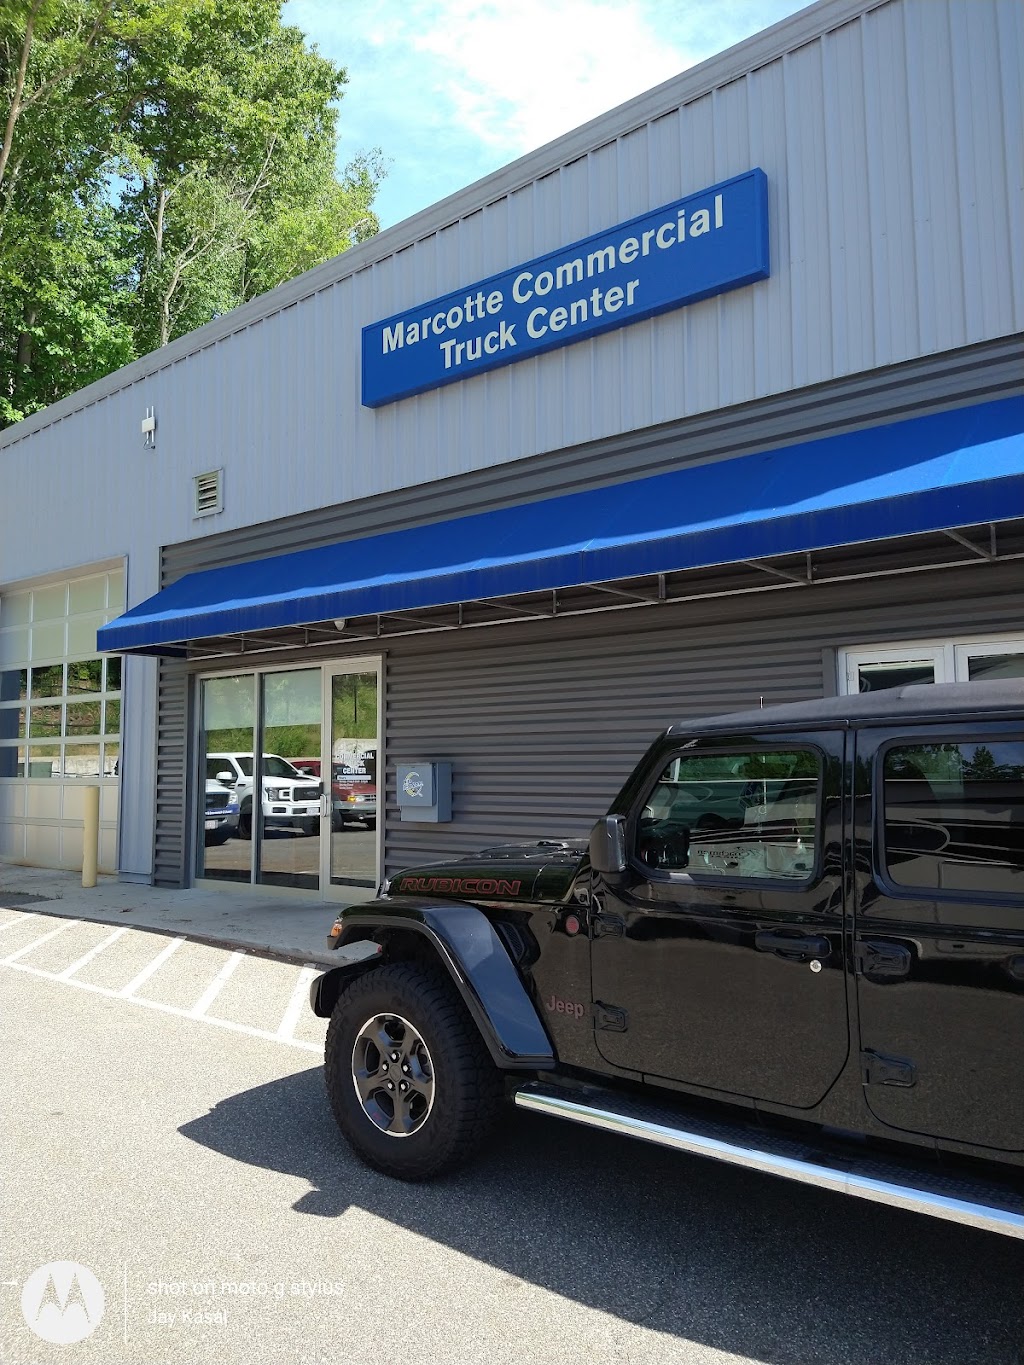 Marcotte Commercial Truck Center | 933 Main St, Holyoke, MA 01040 | Phone: (413) 420-2682